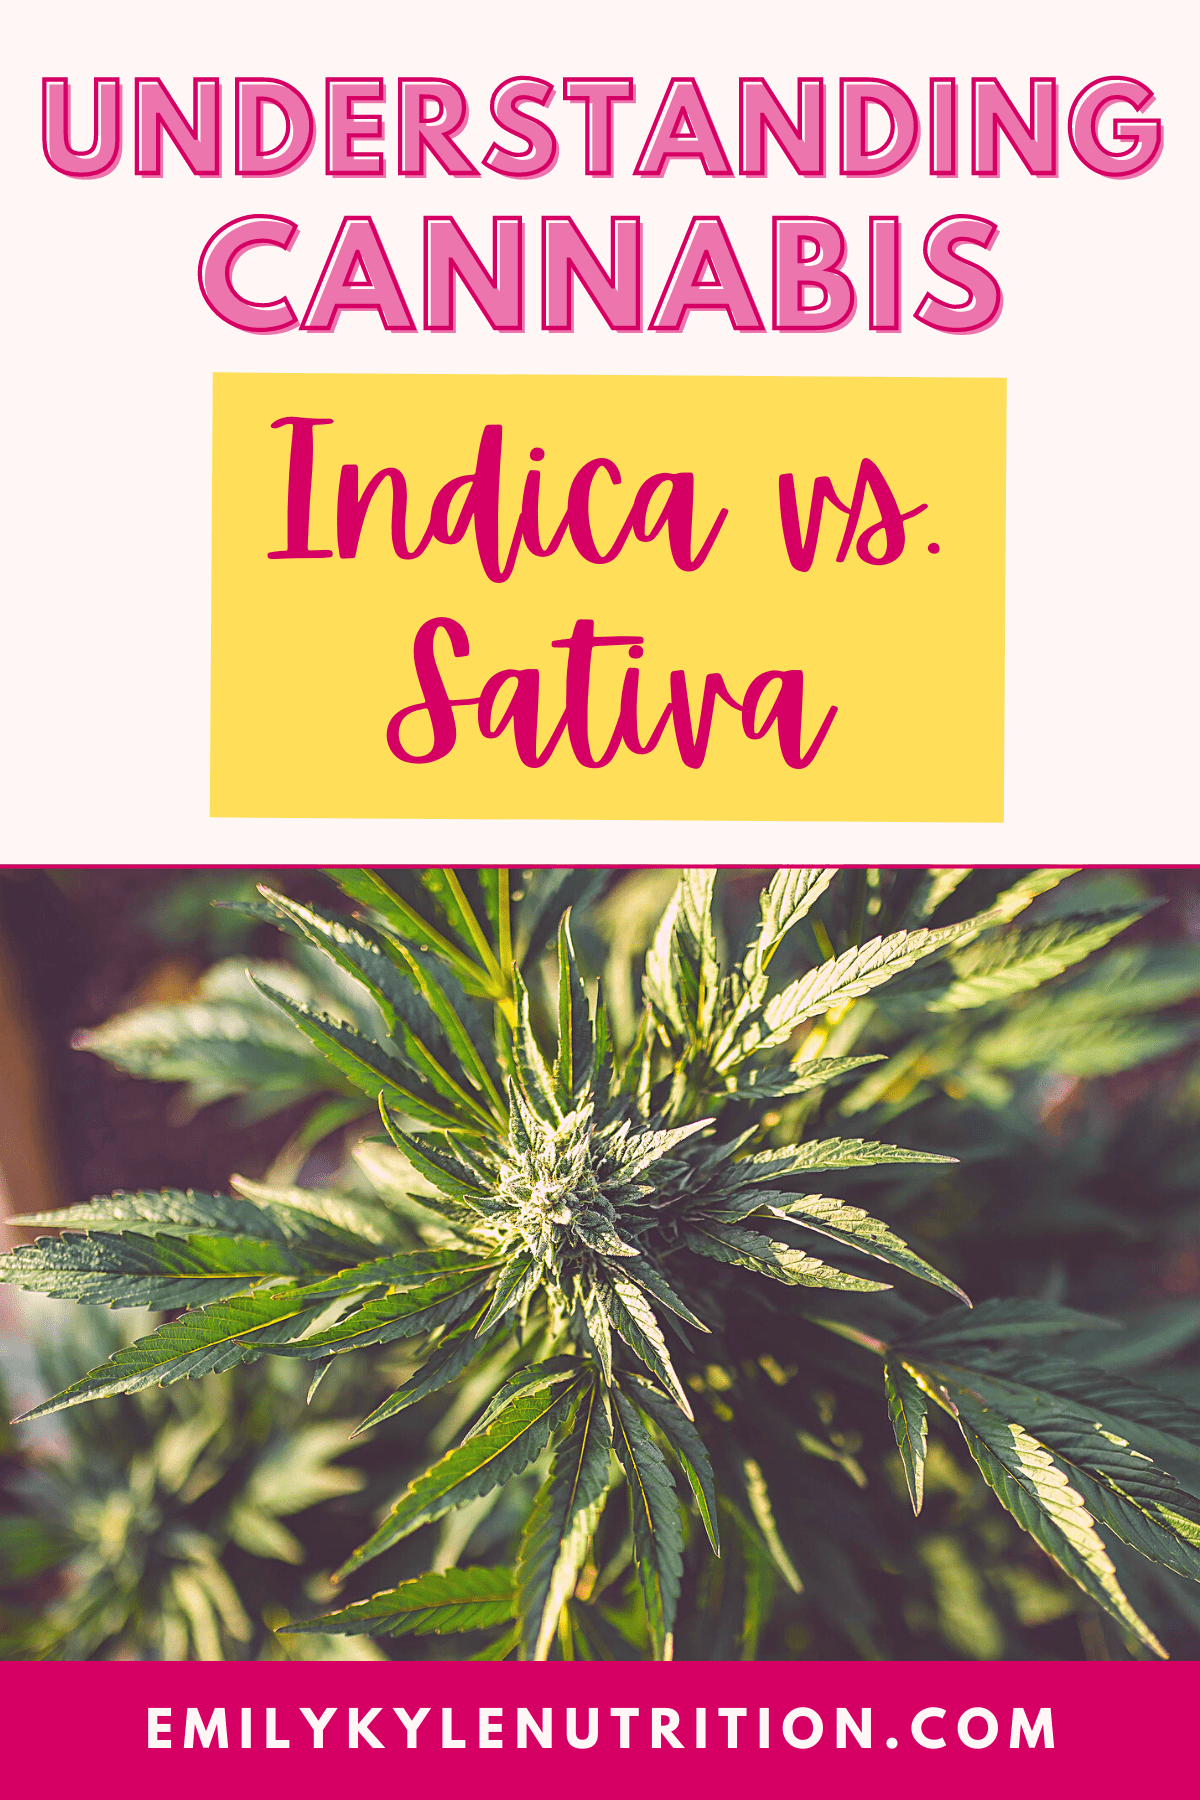 A picture of a cannabis plant with the text Understanding Cannabis Indica vs. Sativa.